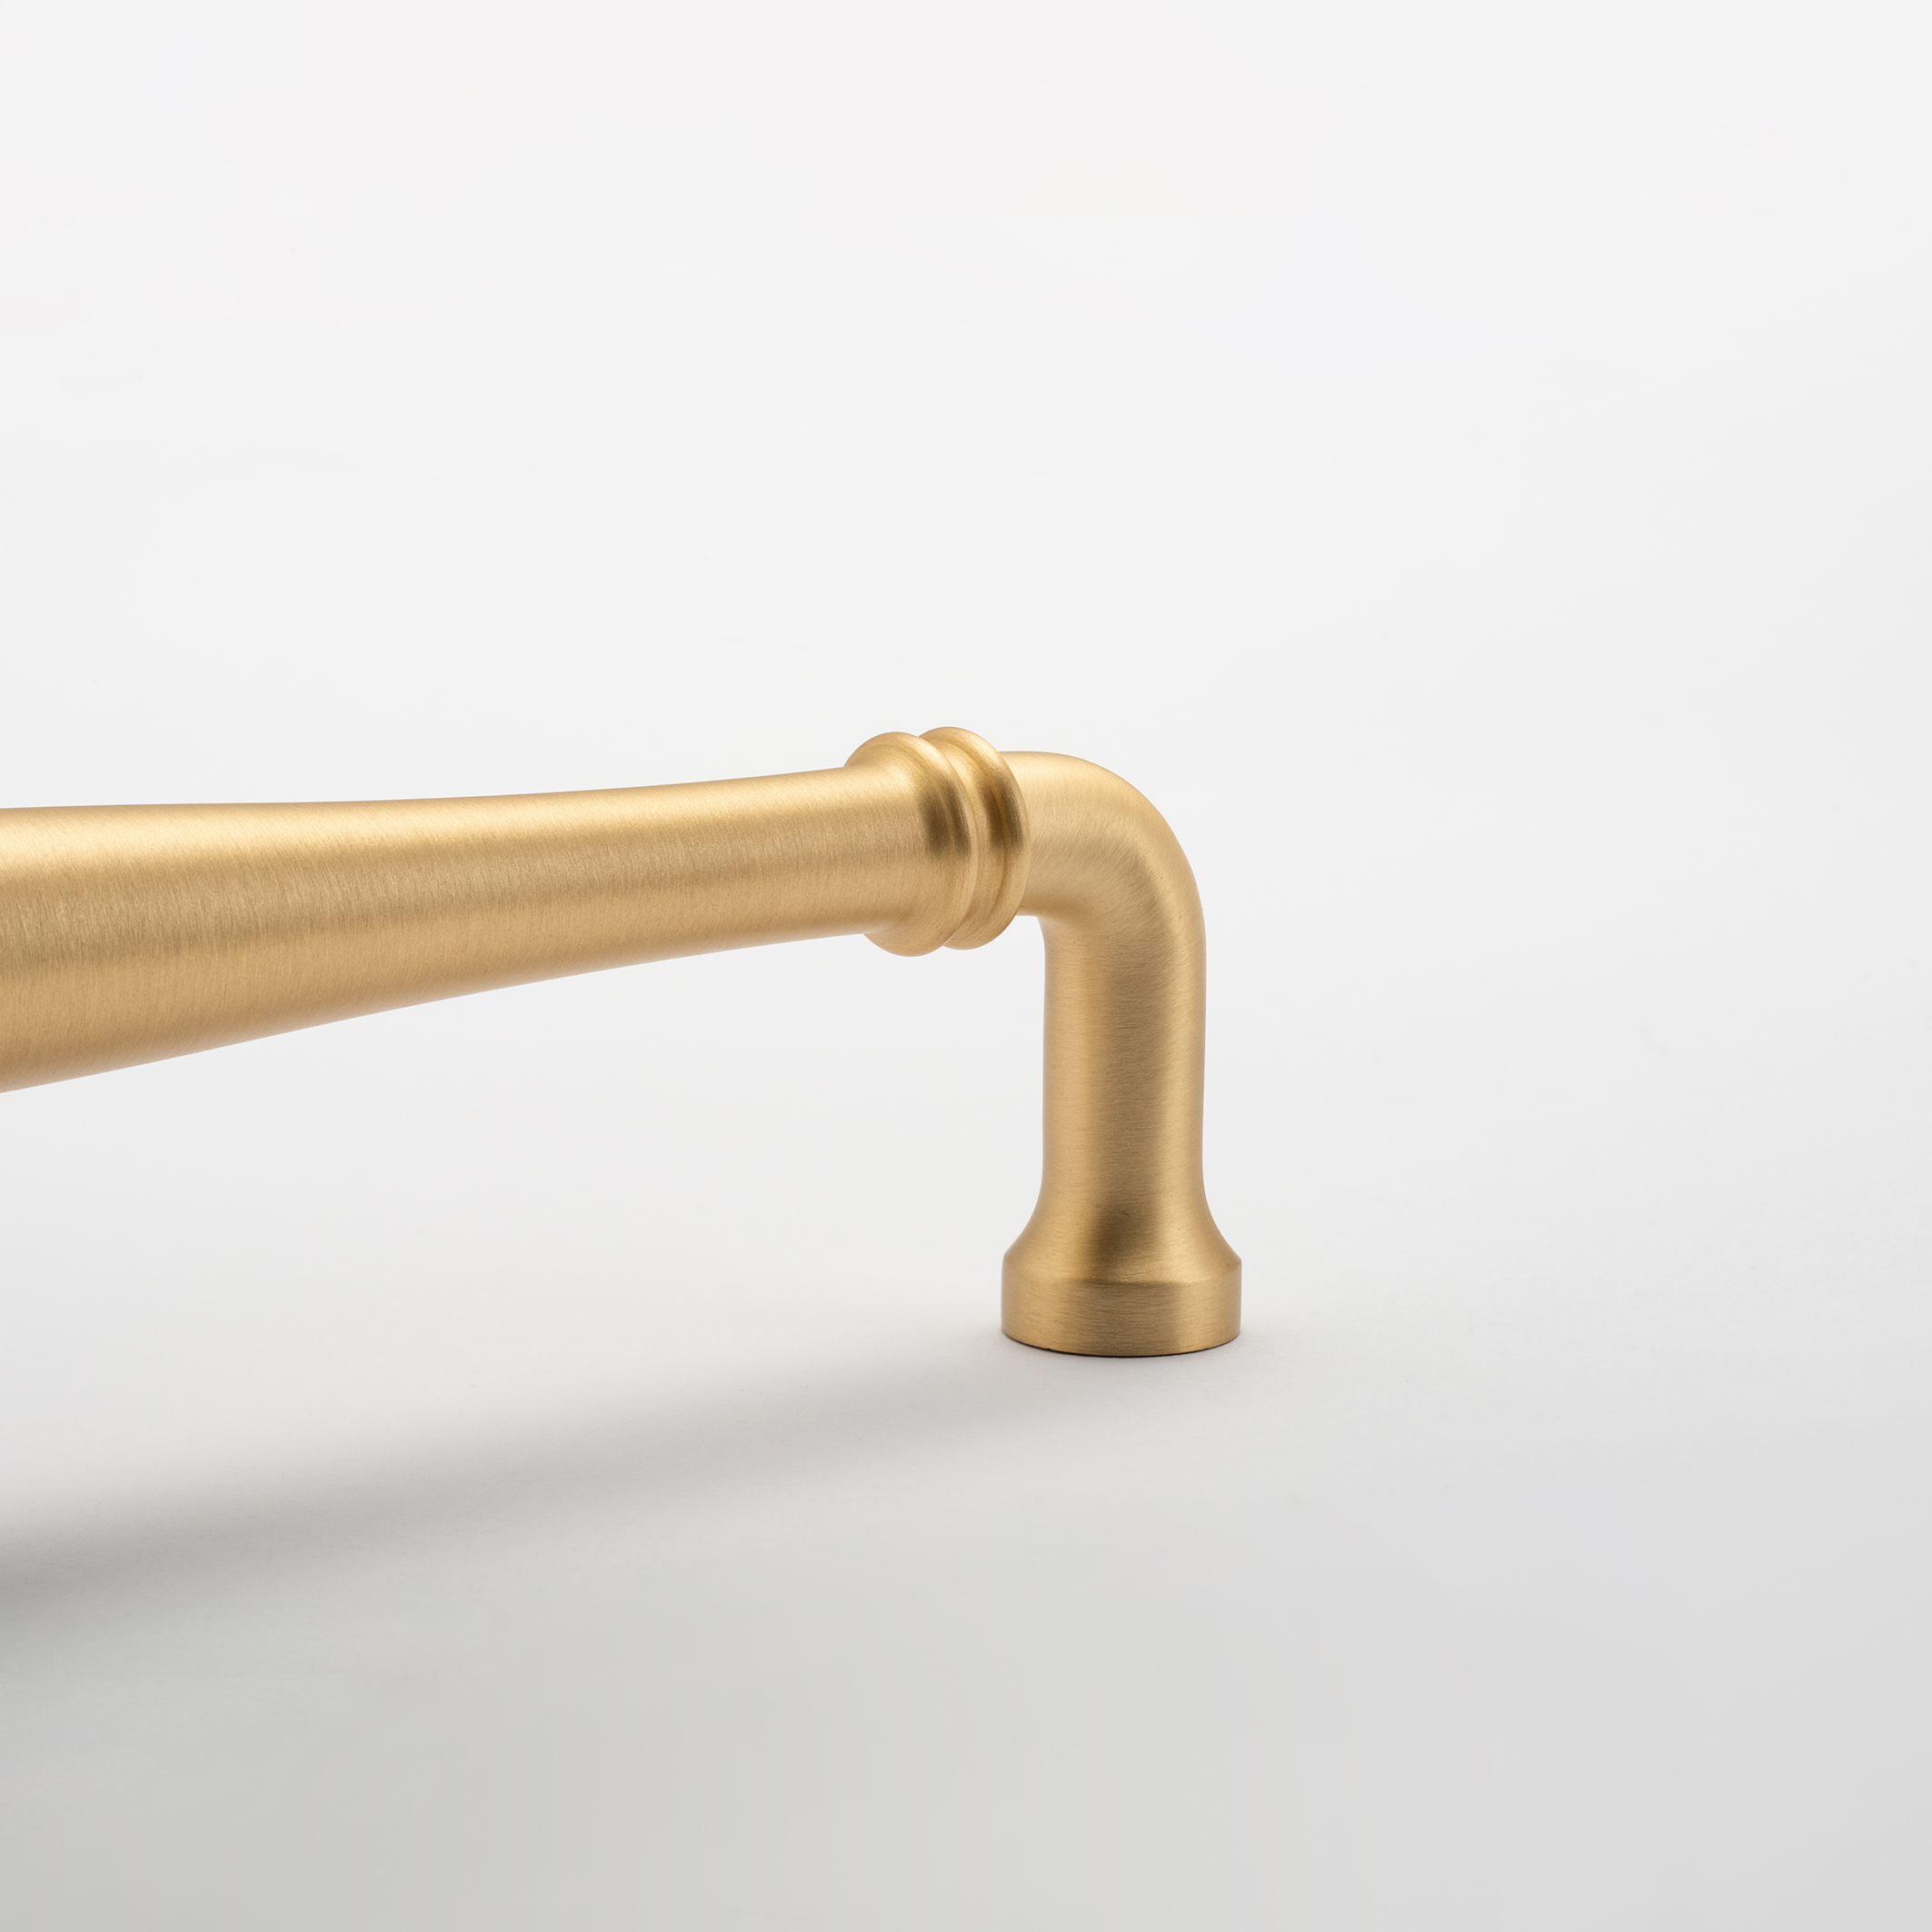 21106 - Sarlat Cabinet Pull - CTC450mm - Brushed Brass